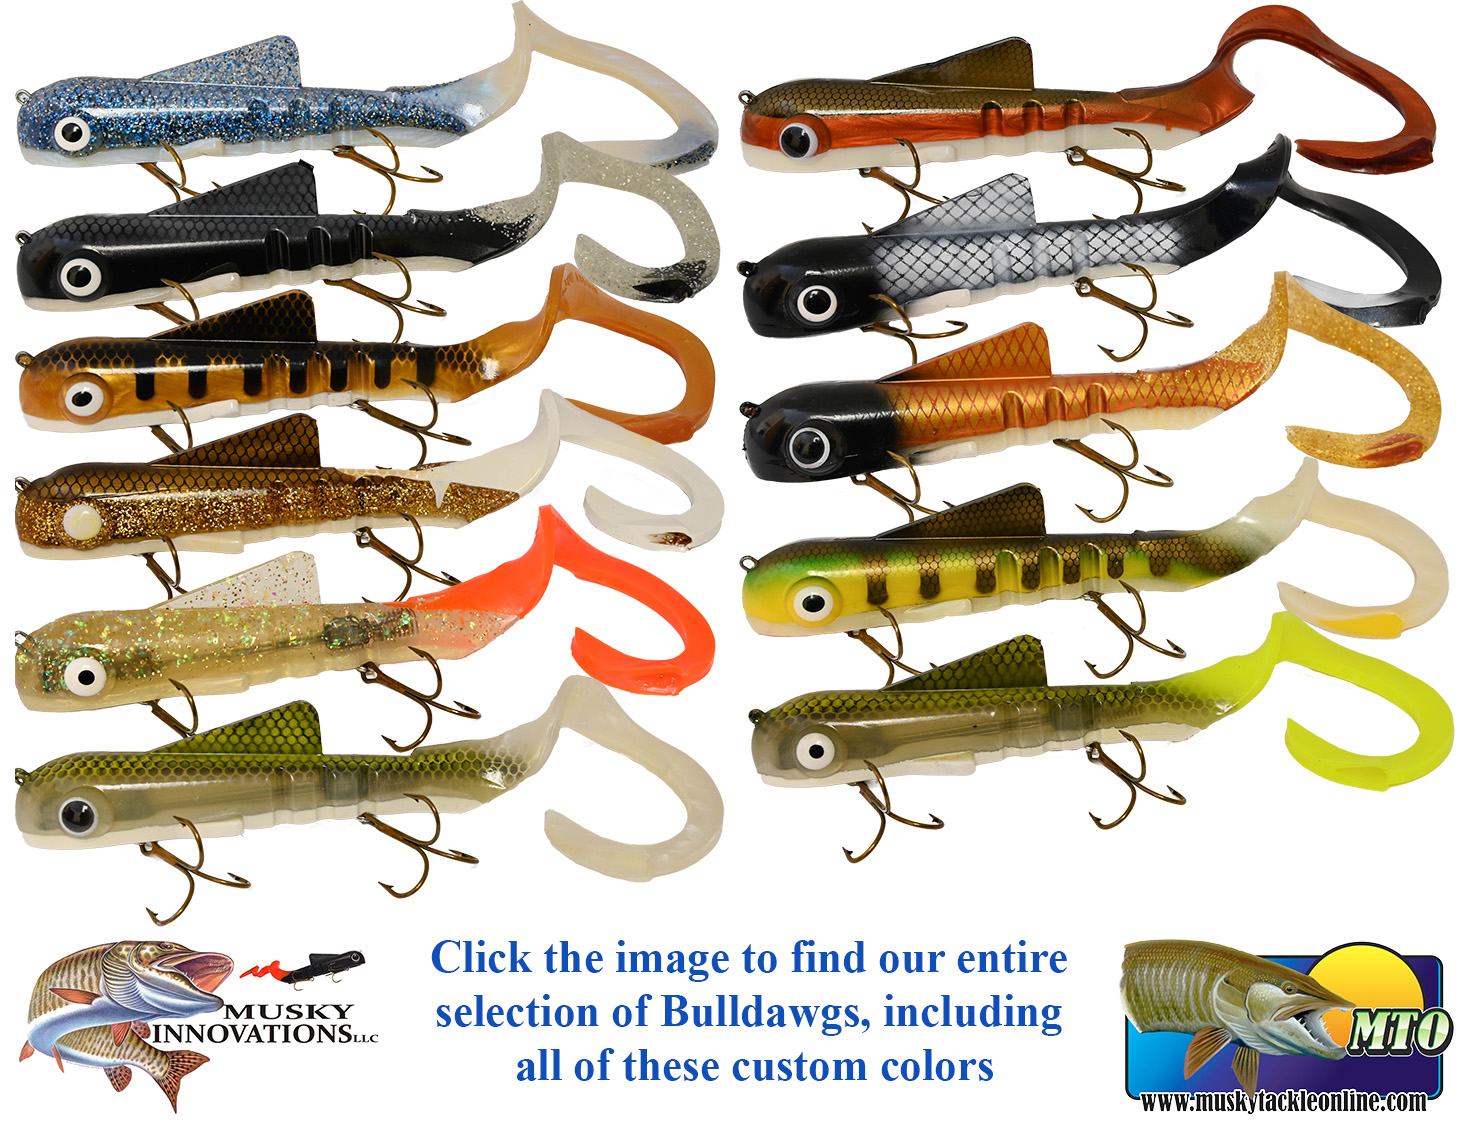 Hawg Wobbler ® - Mouldy's World Famous Musky Lures